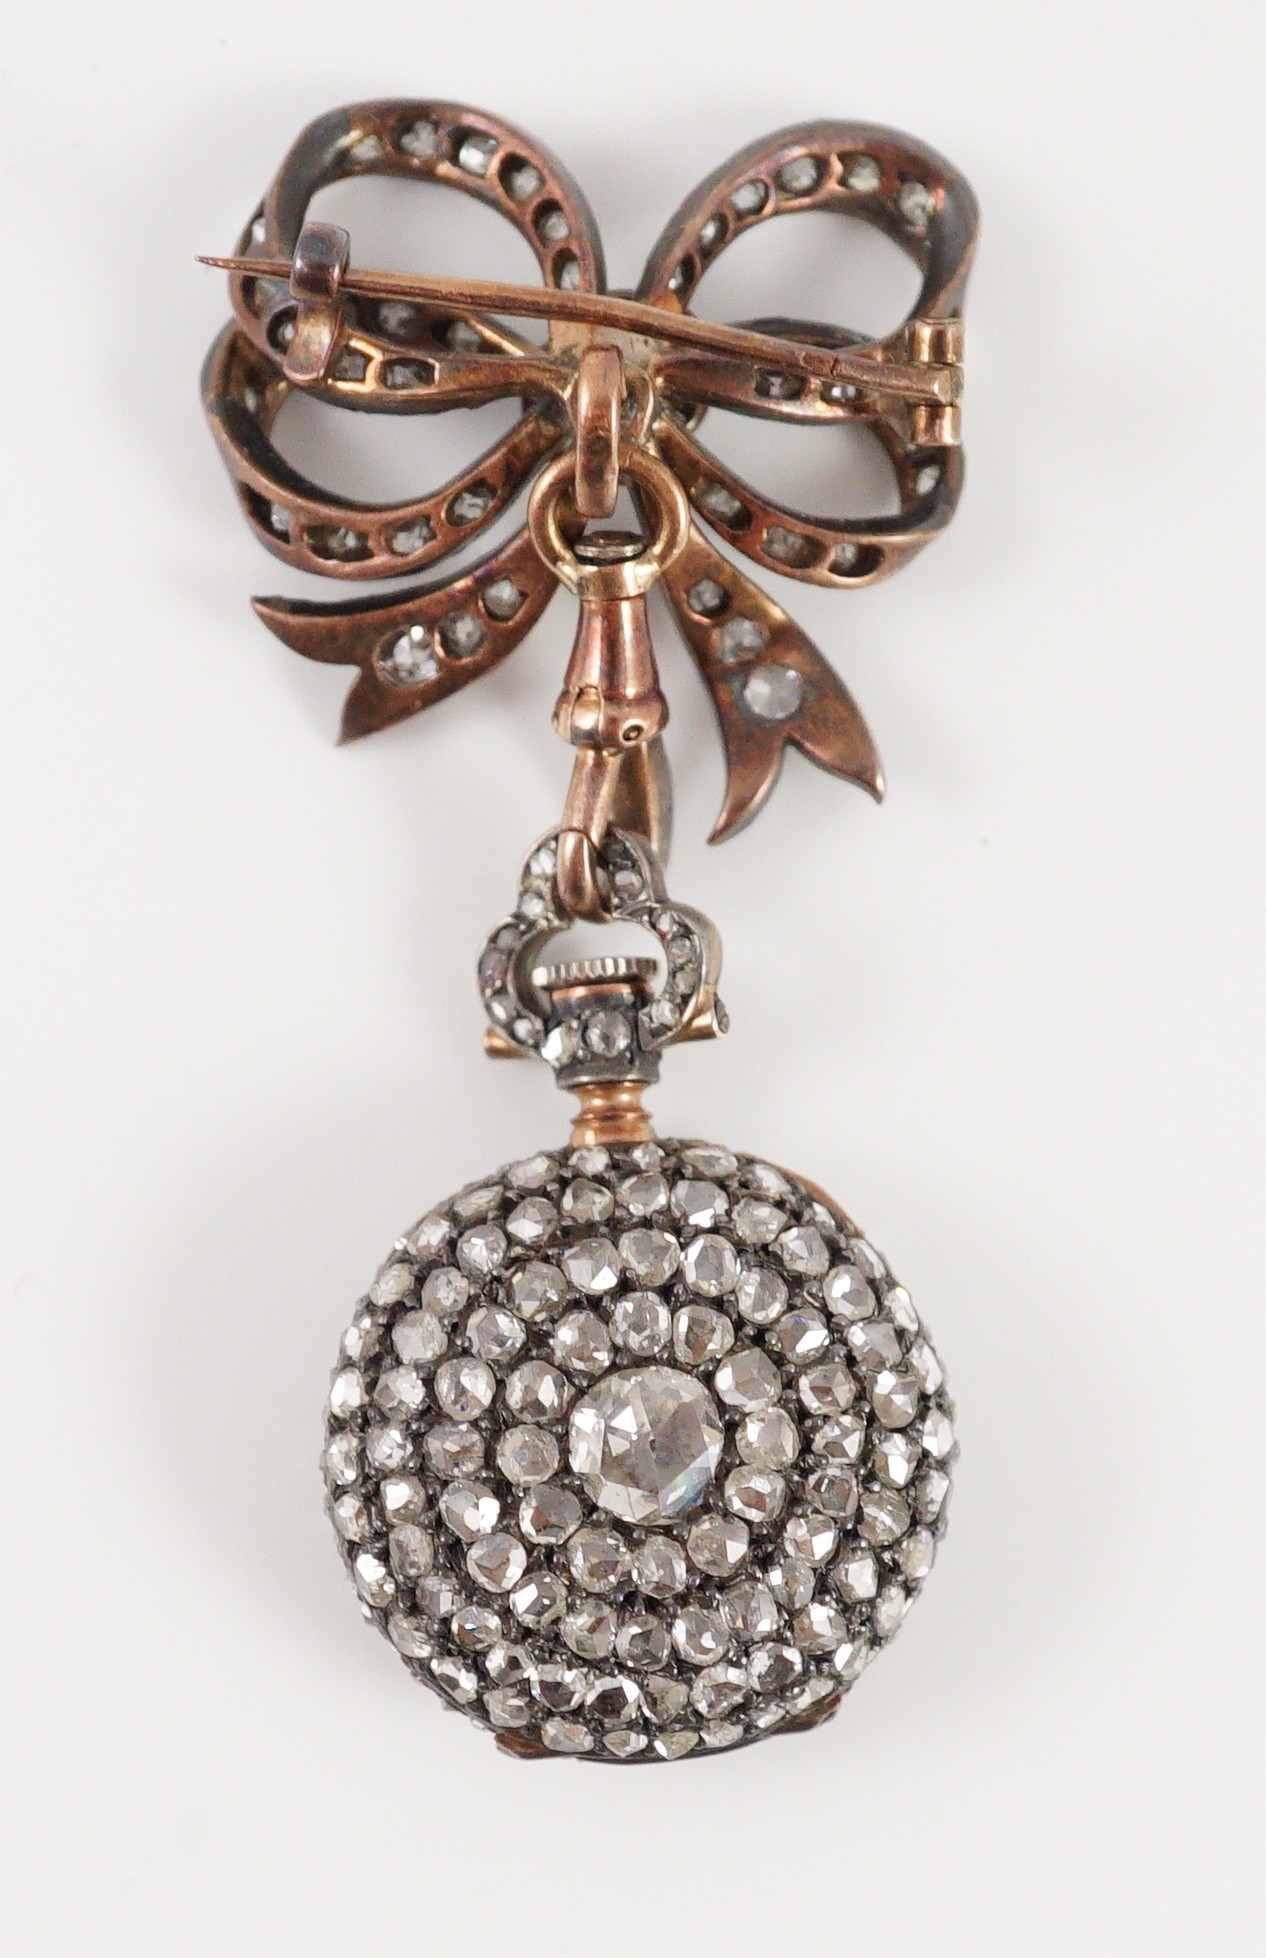 A late 19th century/early 20th century French 18ct gold and rose cut diamond encrusted fob lapel watch, on a rose cut diamond set ribbon bow suspension brooch